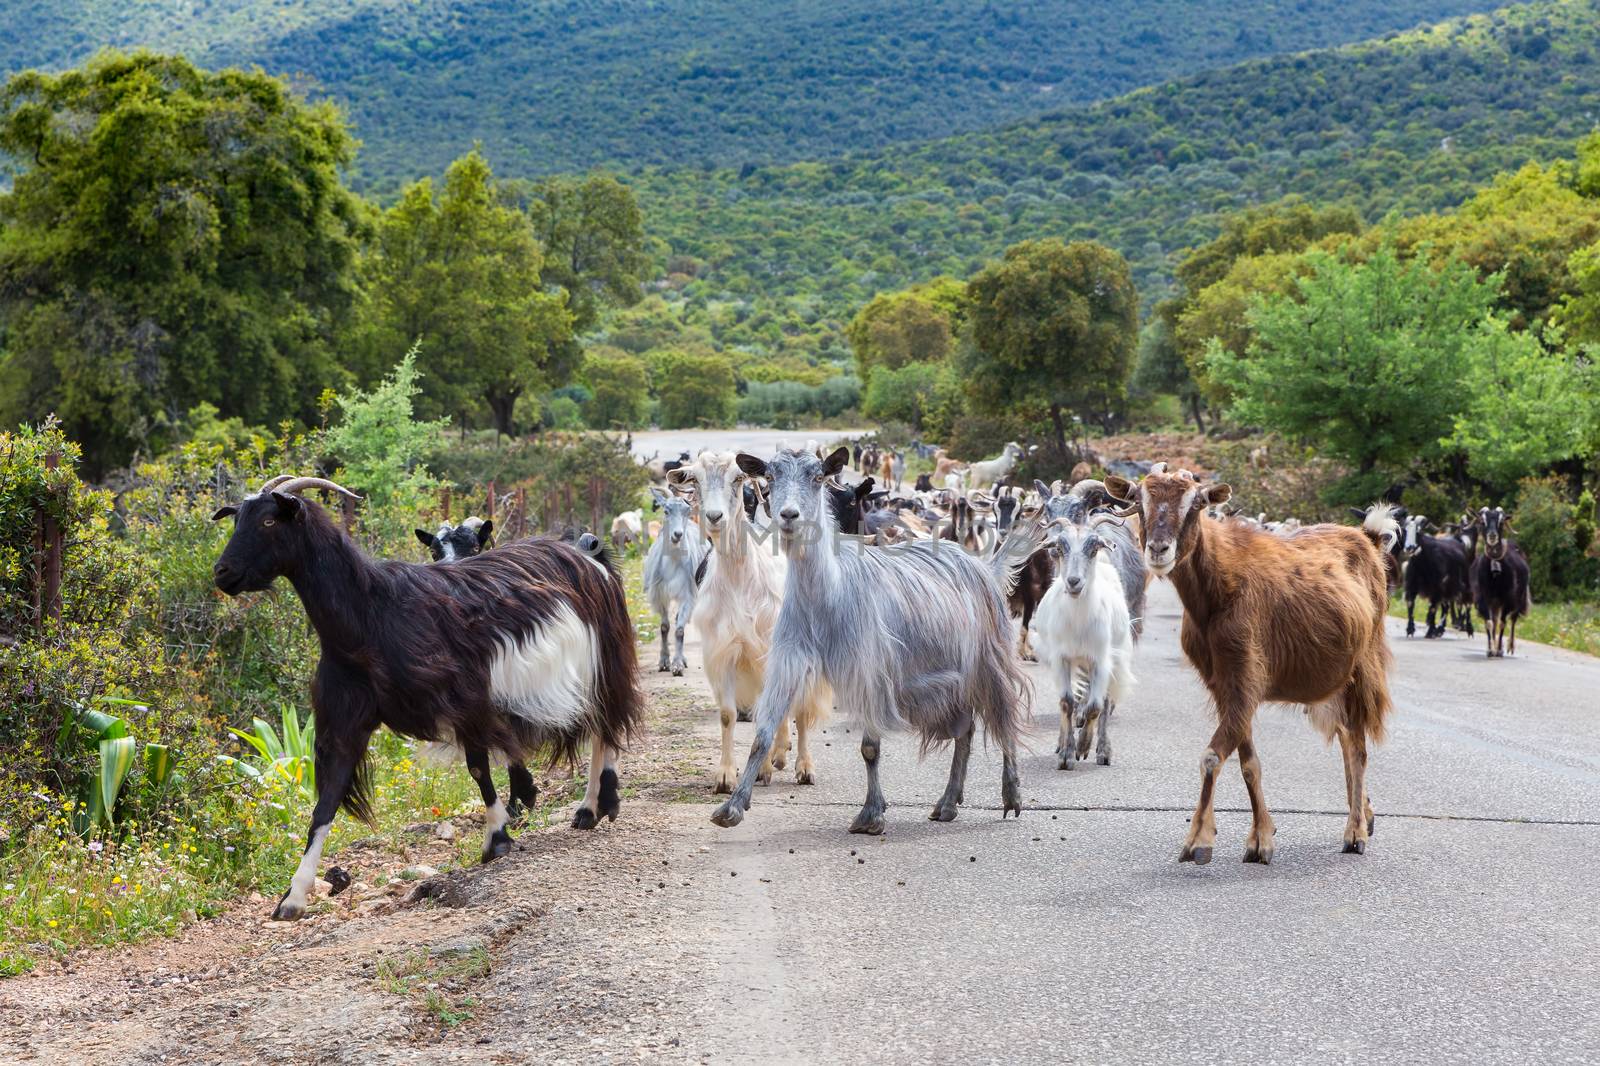 Herd of mountain goats walking on road by BenSchonewille